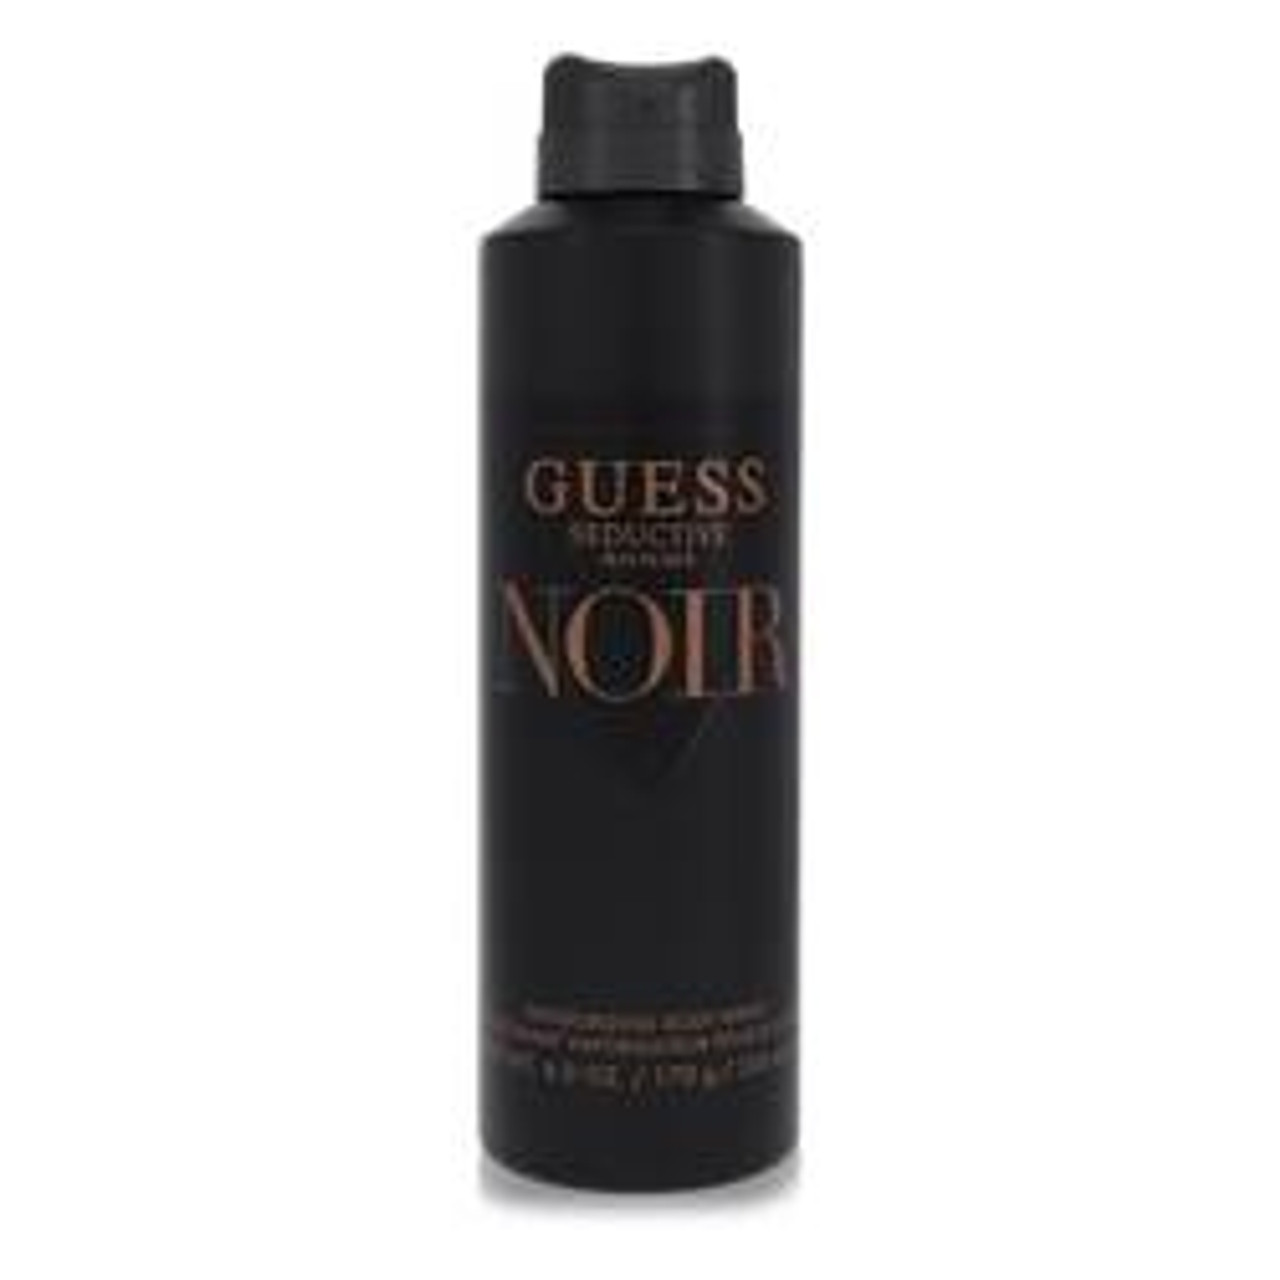 Guess Seductive Homme Noir Cologne By Guess Body Spray 6 oz for Men - [From 27.00 - Choose pk Qty ] - *Ships from Miami